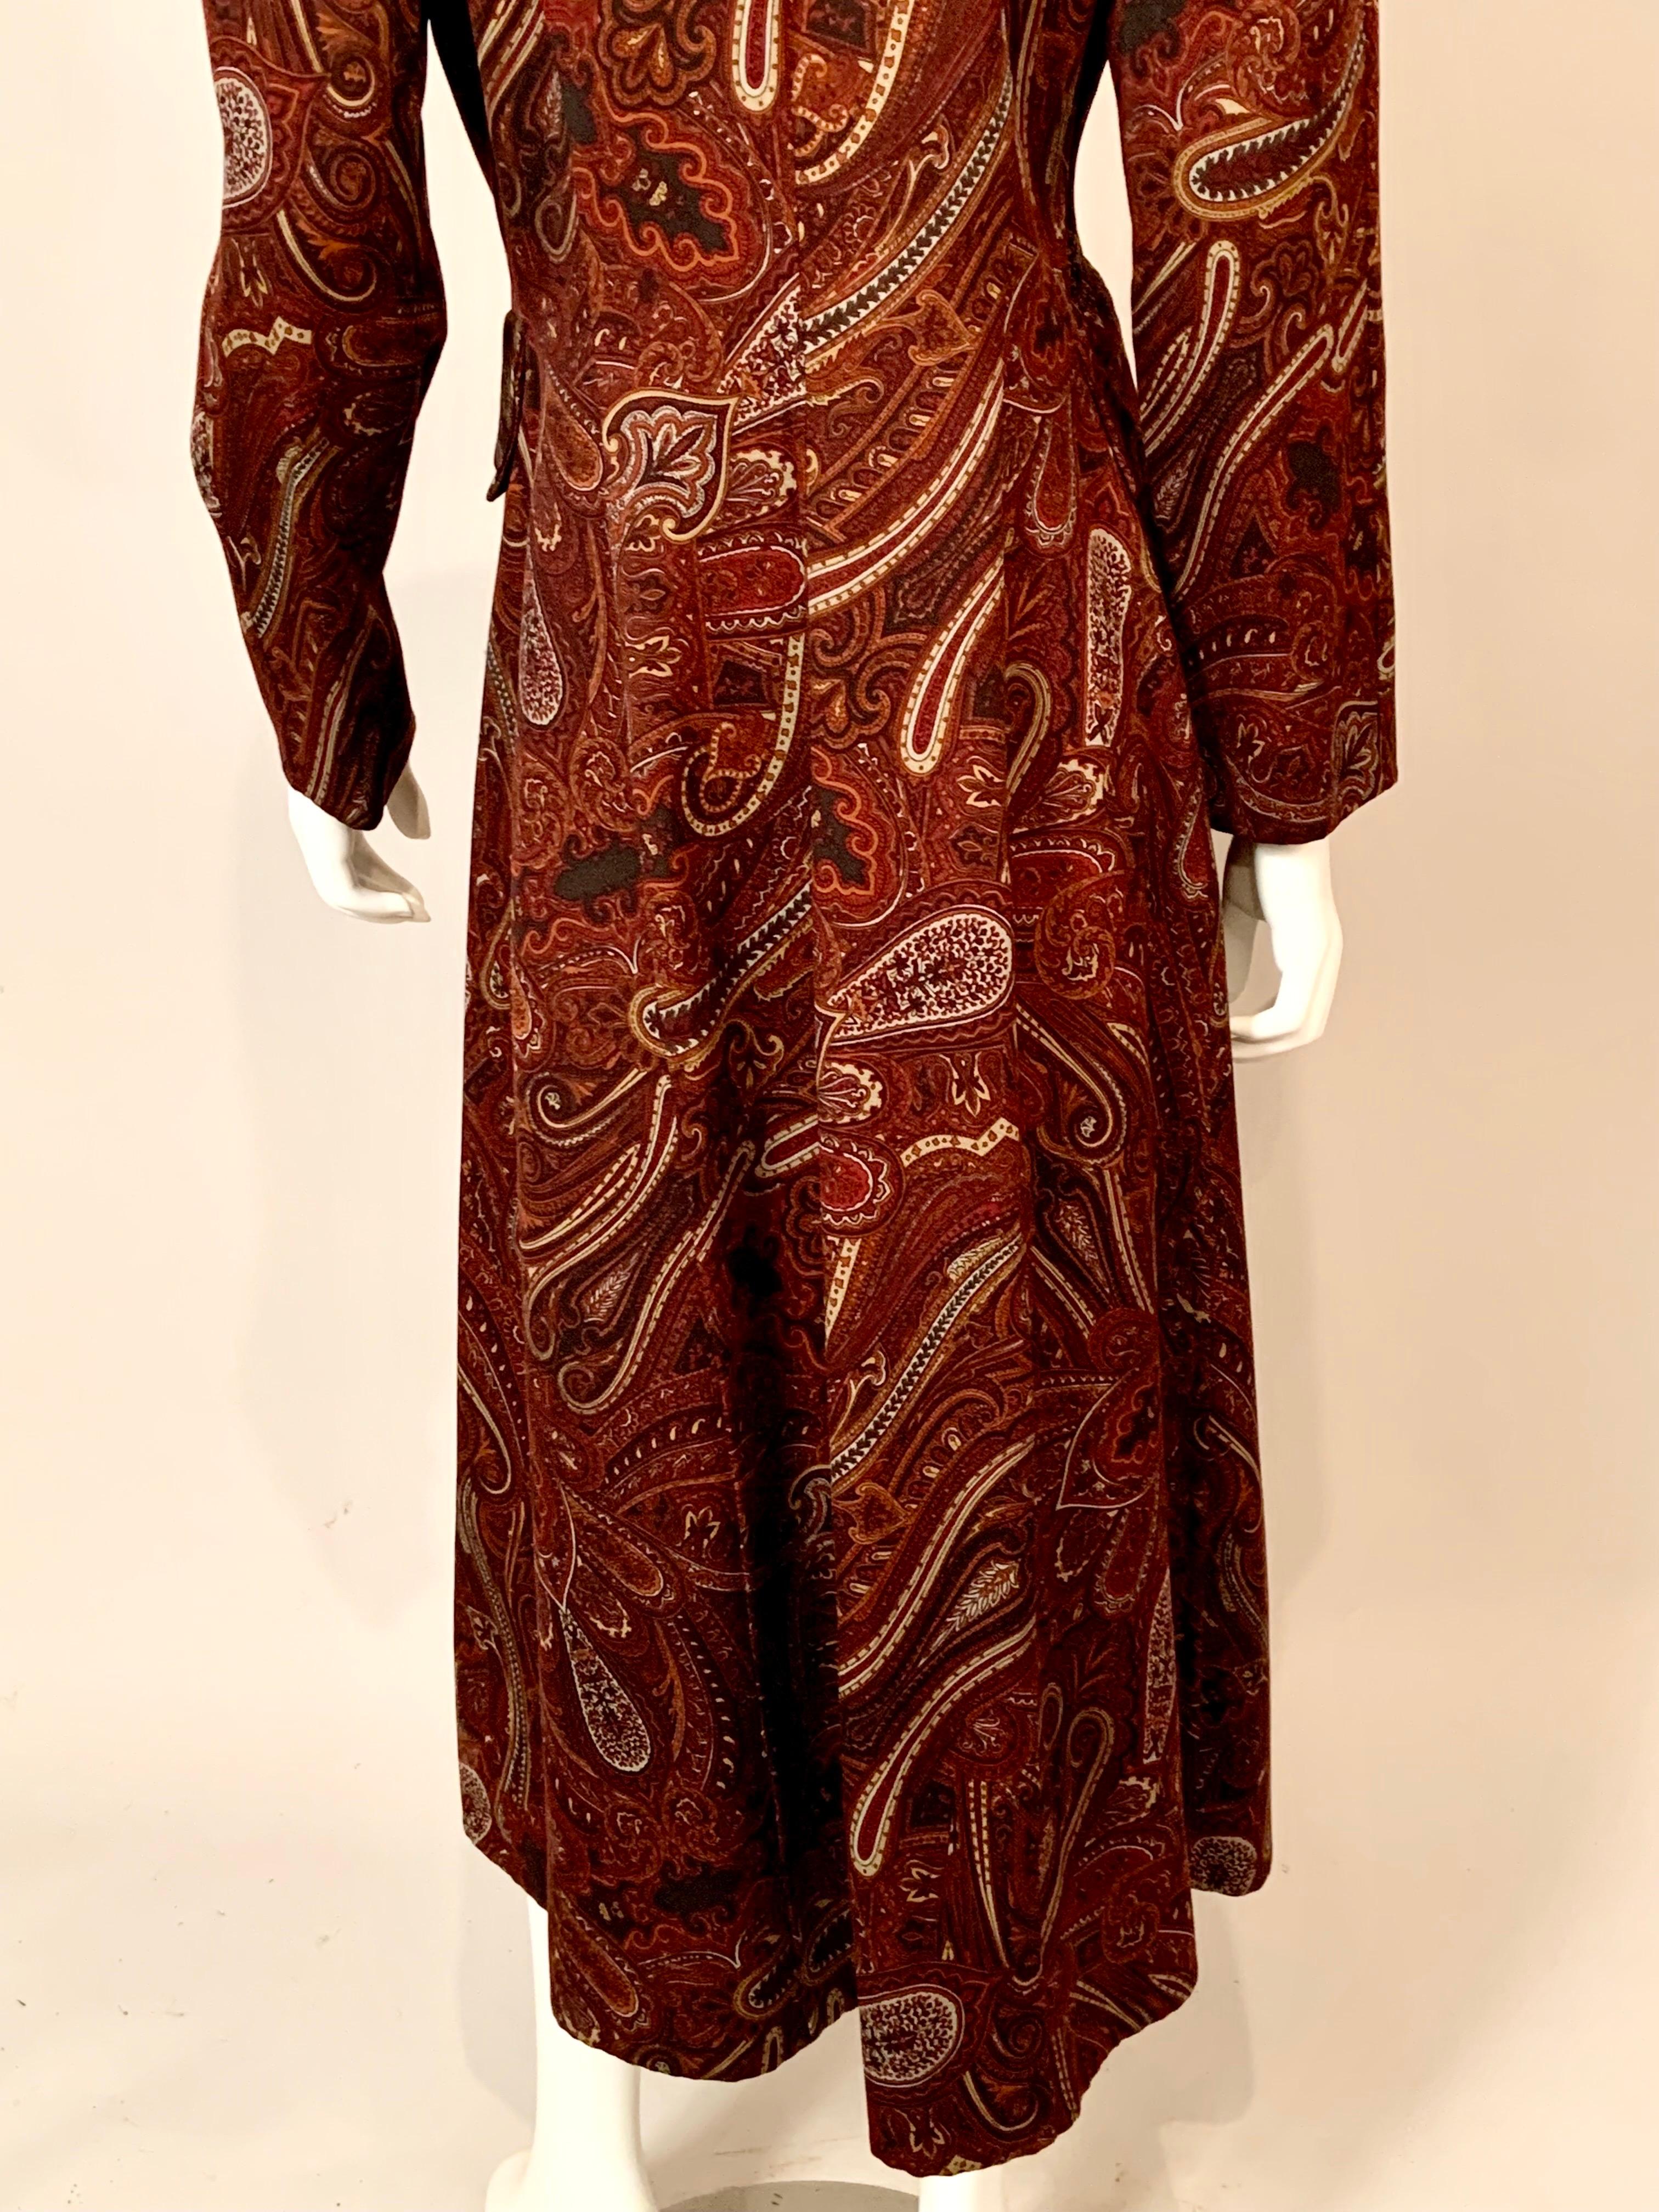 Bill Blass Paisley Patterned Coat in a Larger Size For Sale 5